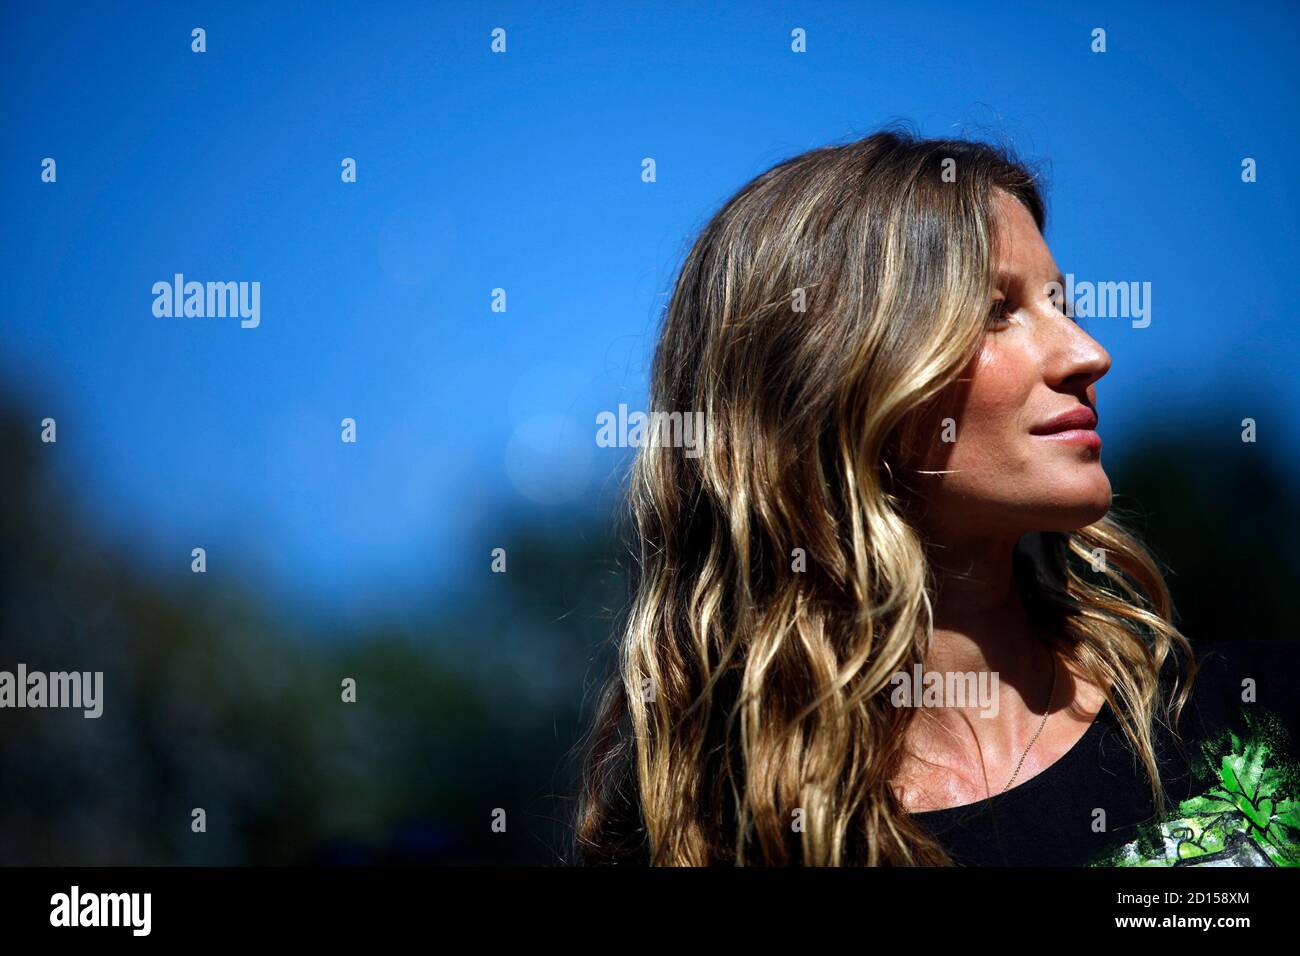 Model Gisele Bundchen speaks at a news conference in New York September 20, 2009. Bundchen has been designated Goodwill Ambassador for the United Nations Environment Programme (UNEP). REUTERS/Eric Thayer (UNITED STATES ENTERTAINMENT) Stock Photo